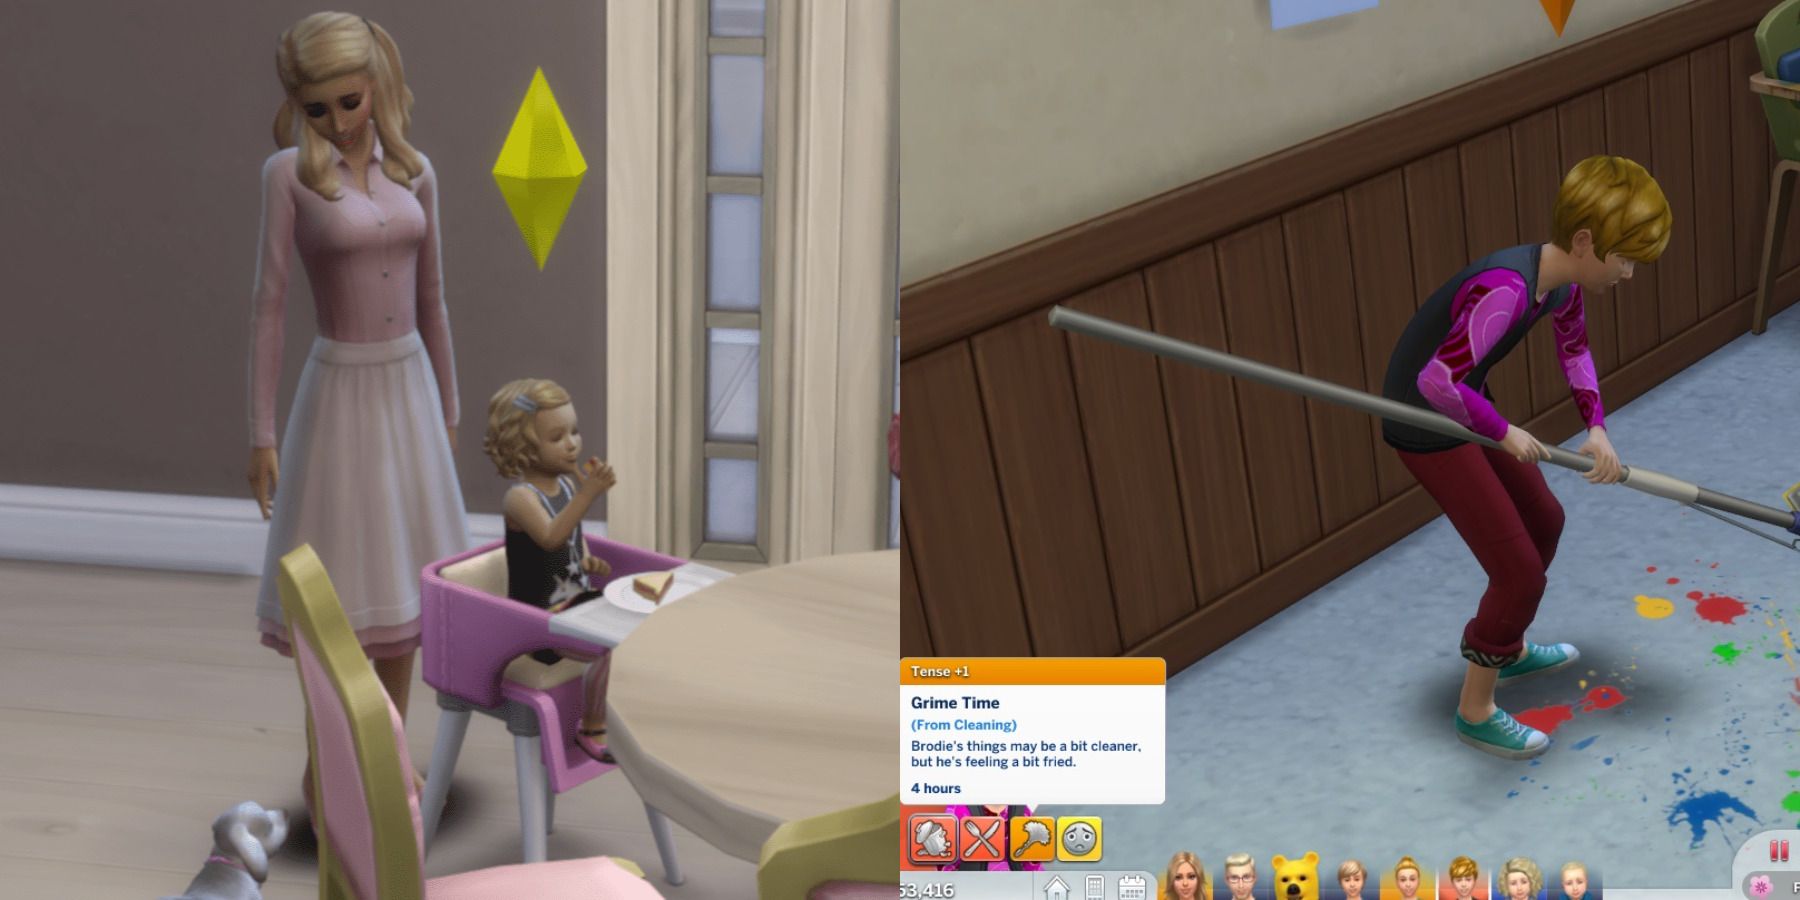 The Sims 4 parenting guide feature